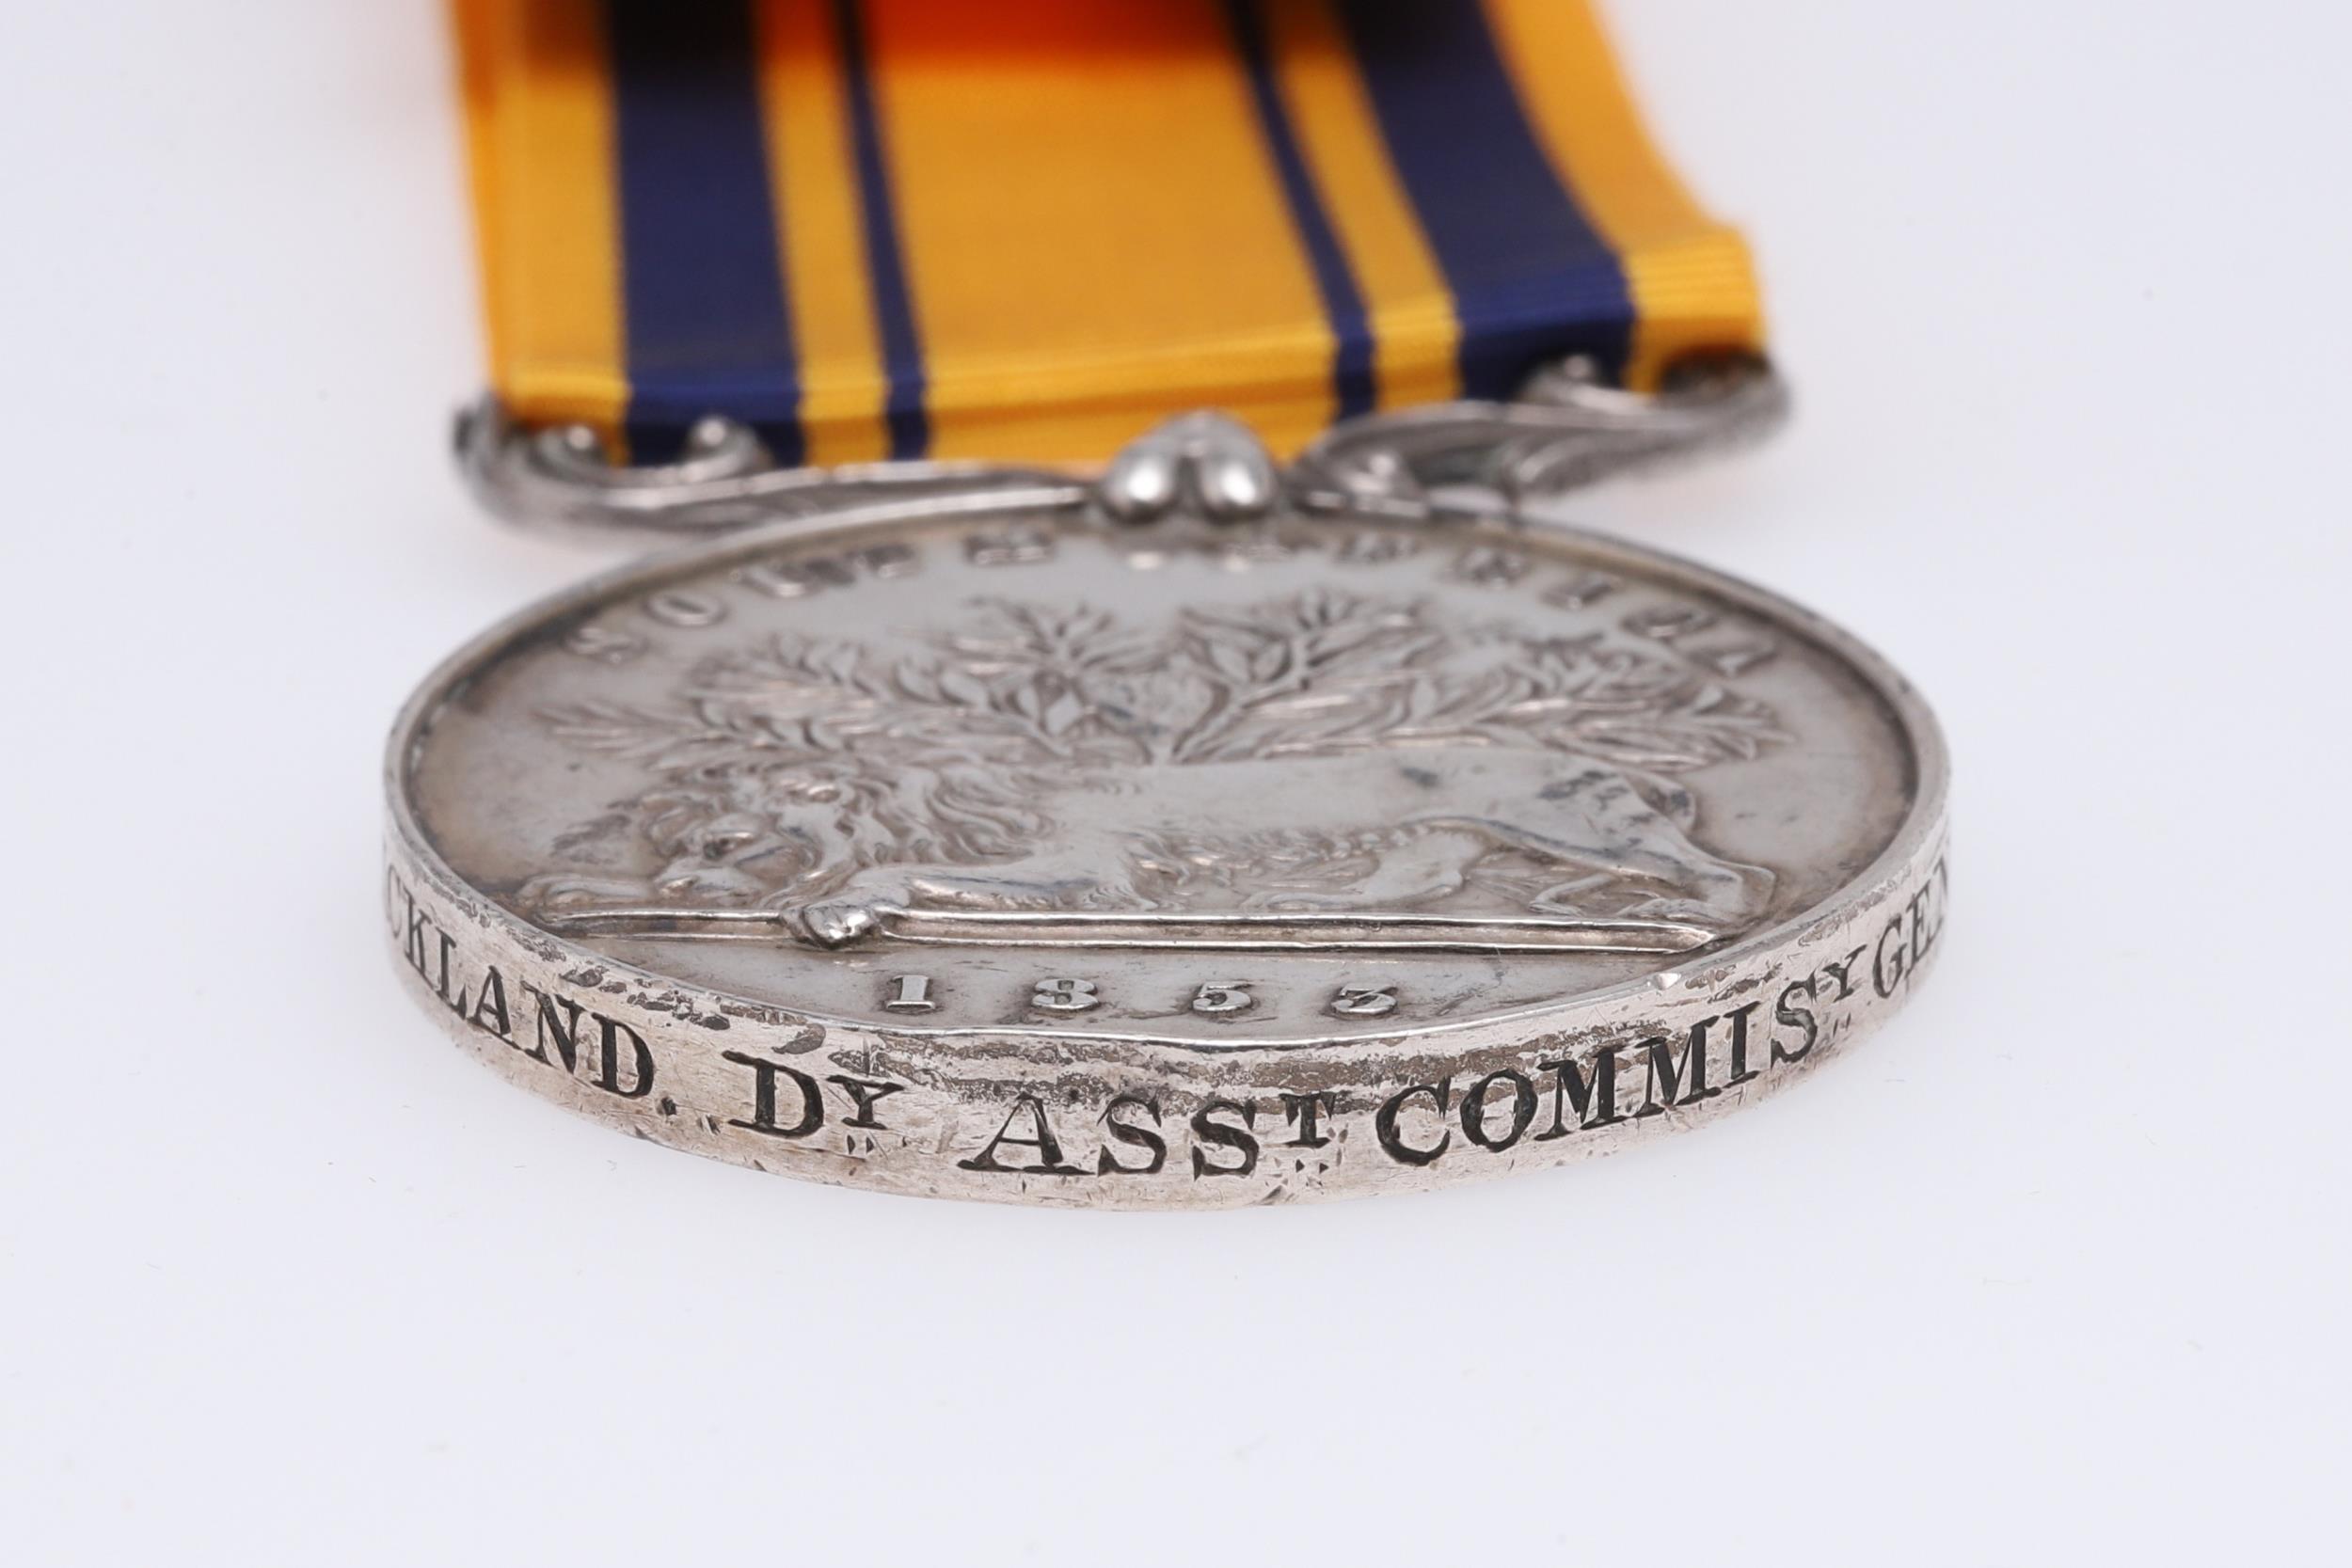 A SOUTH AFRICA 1853 MEDAL POSSIBLY TO DEPUTY ASST. COMMISSARY GENERAL STRICKLAND. - Bild 4 aus 6